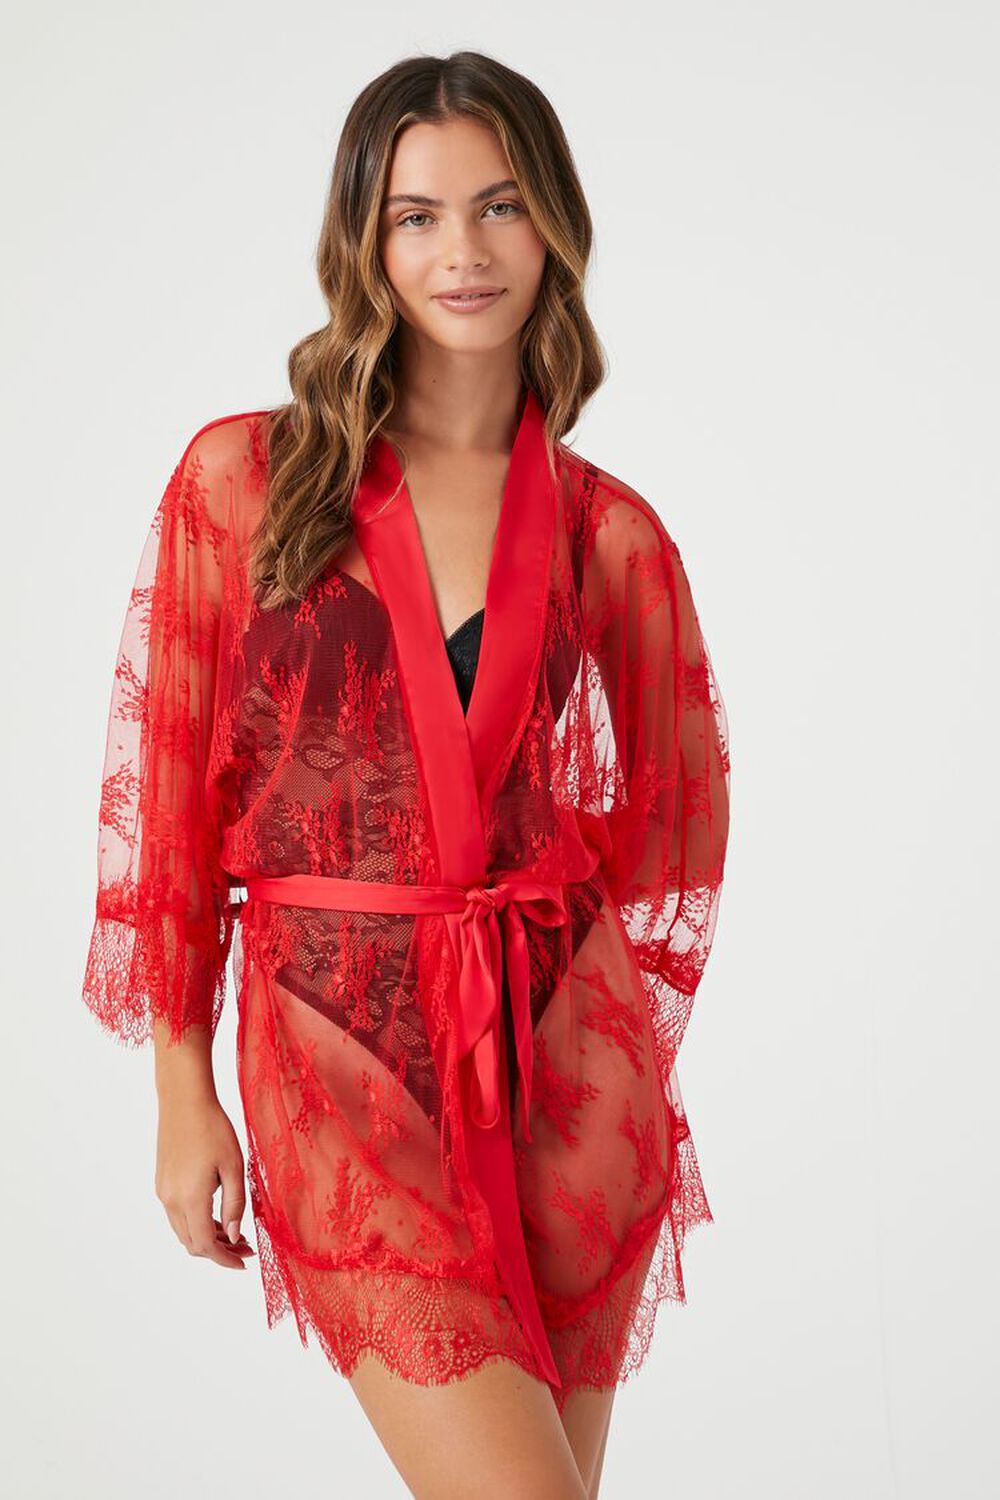 FIERY RED Sheer Lace Lingerie Robe, image 1